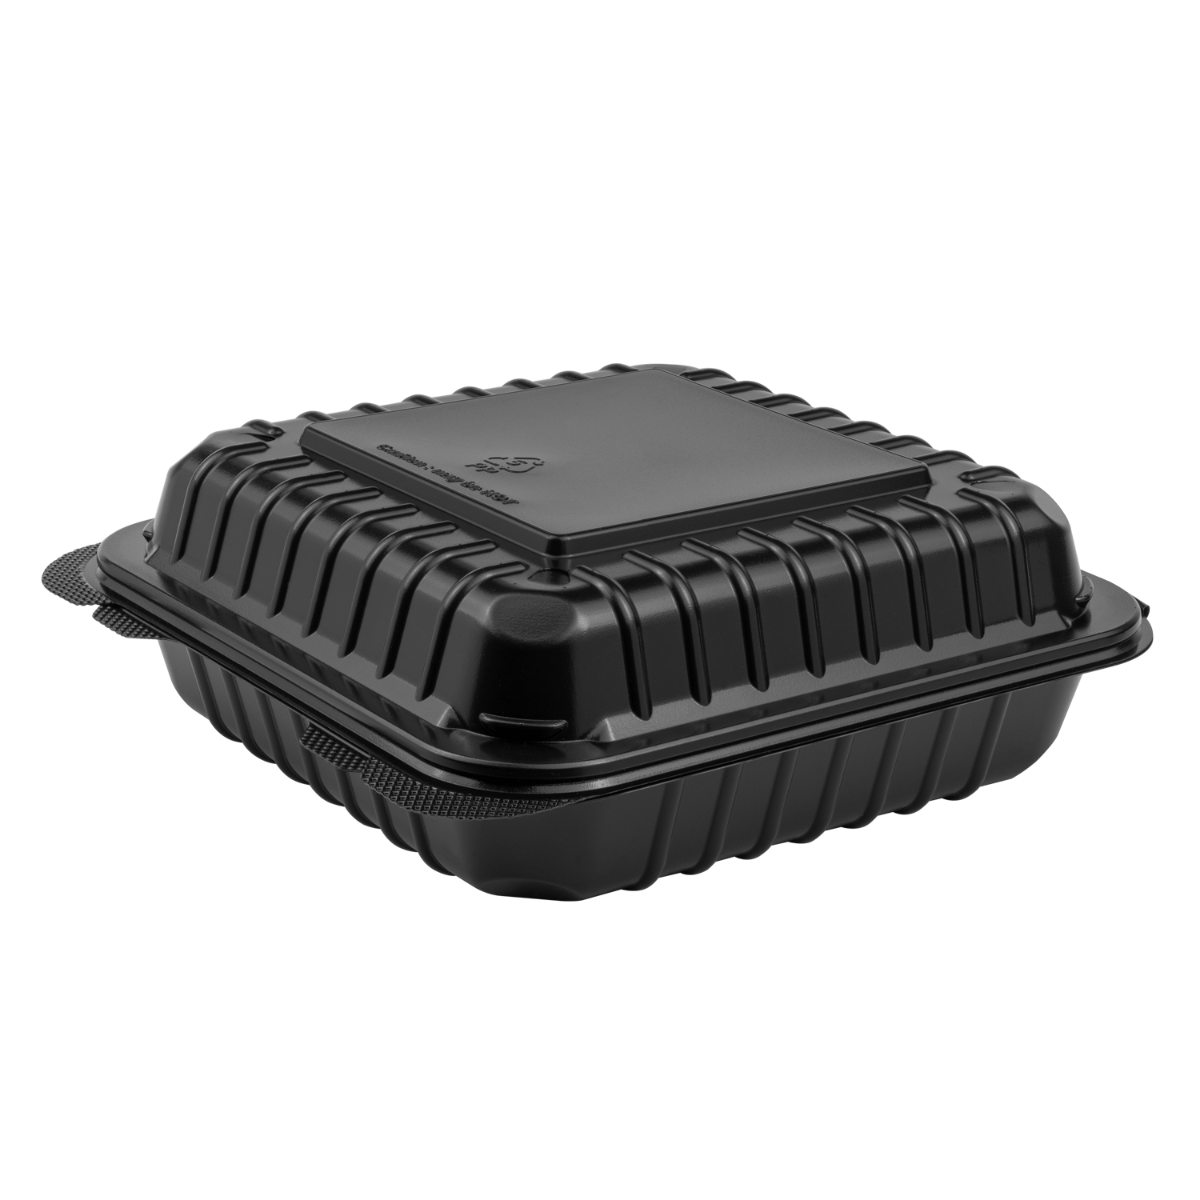 https://www.restaurantsupplydrops.shop/wp-content/uploads/1689/33/shop-8x8-black-hinged-containers-large-black-clamshell-takeout-boxes-karat-pp-plastic-250-count-karat-were-dedicated-to-ensuring-your-satisfaction_1.png